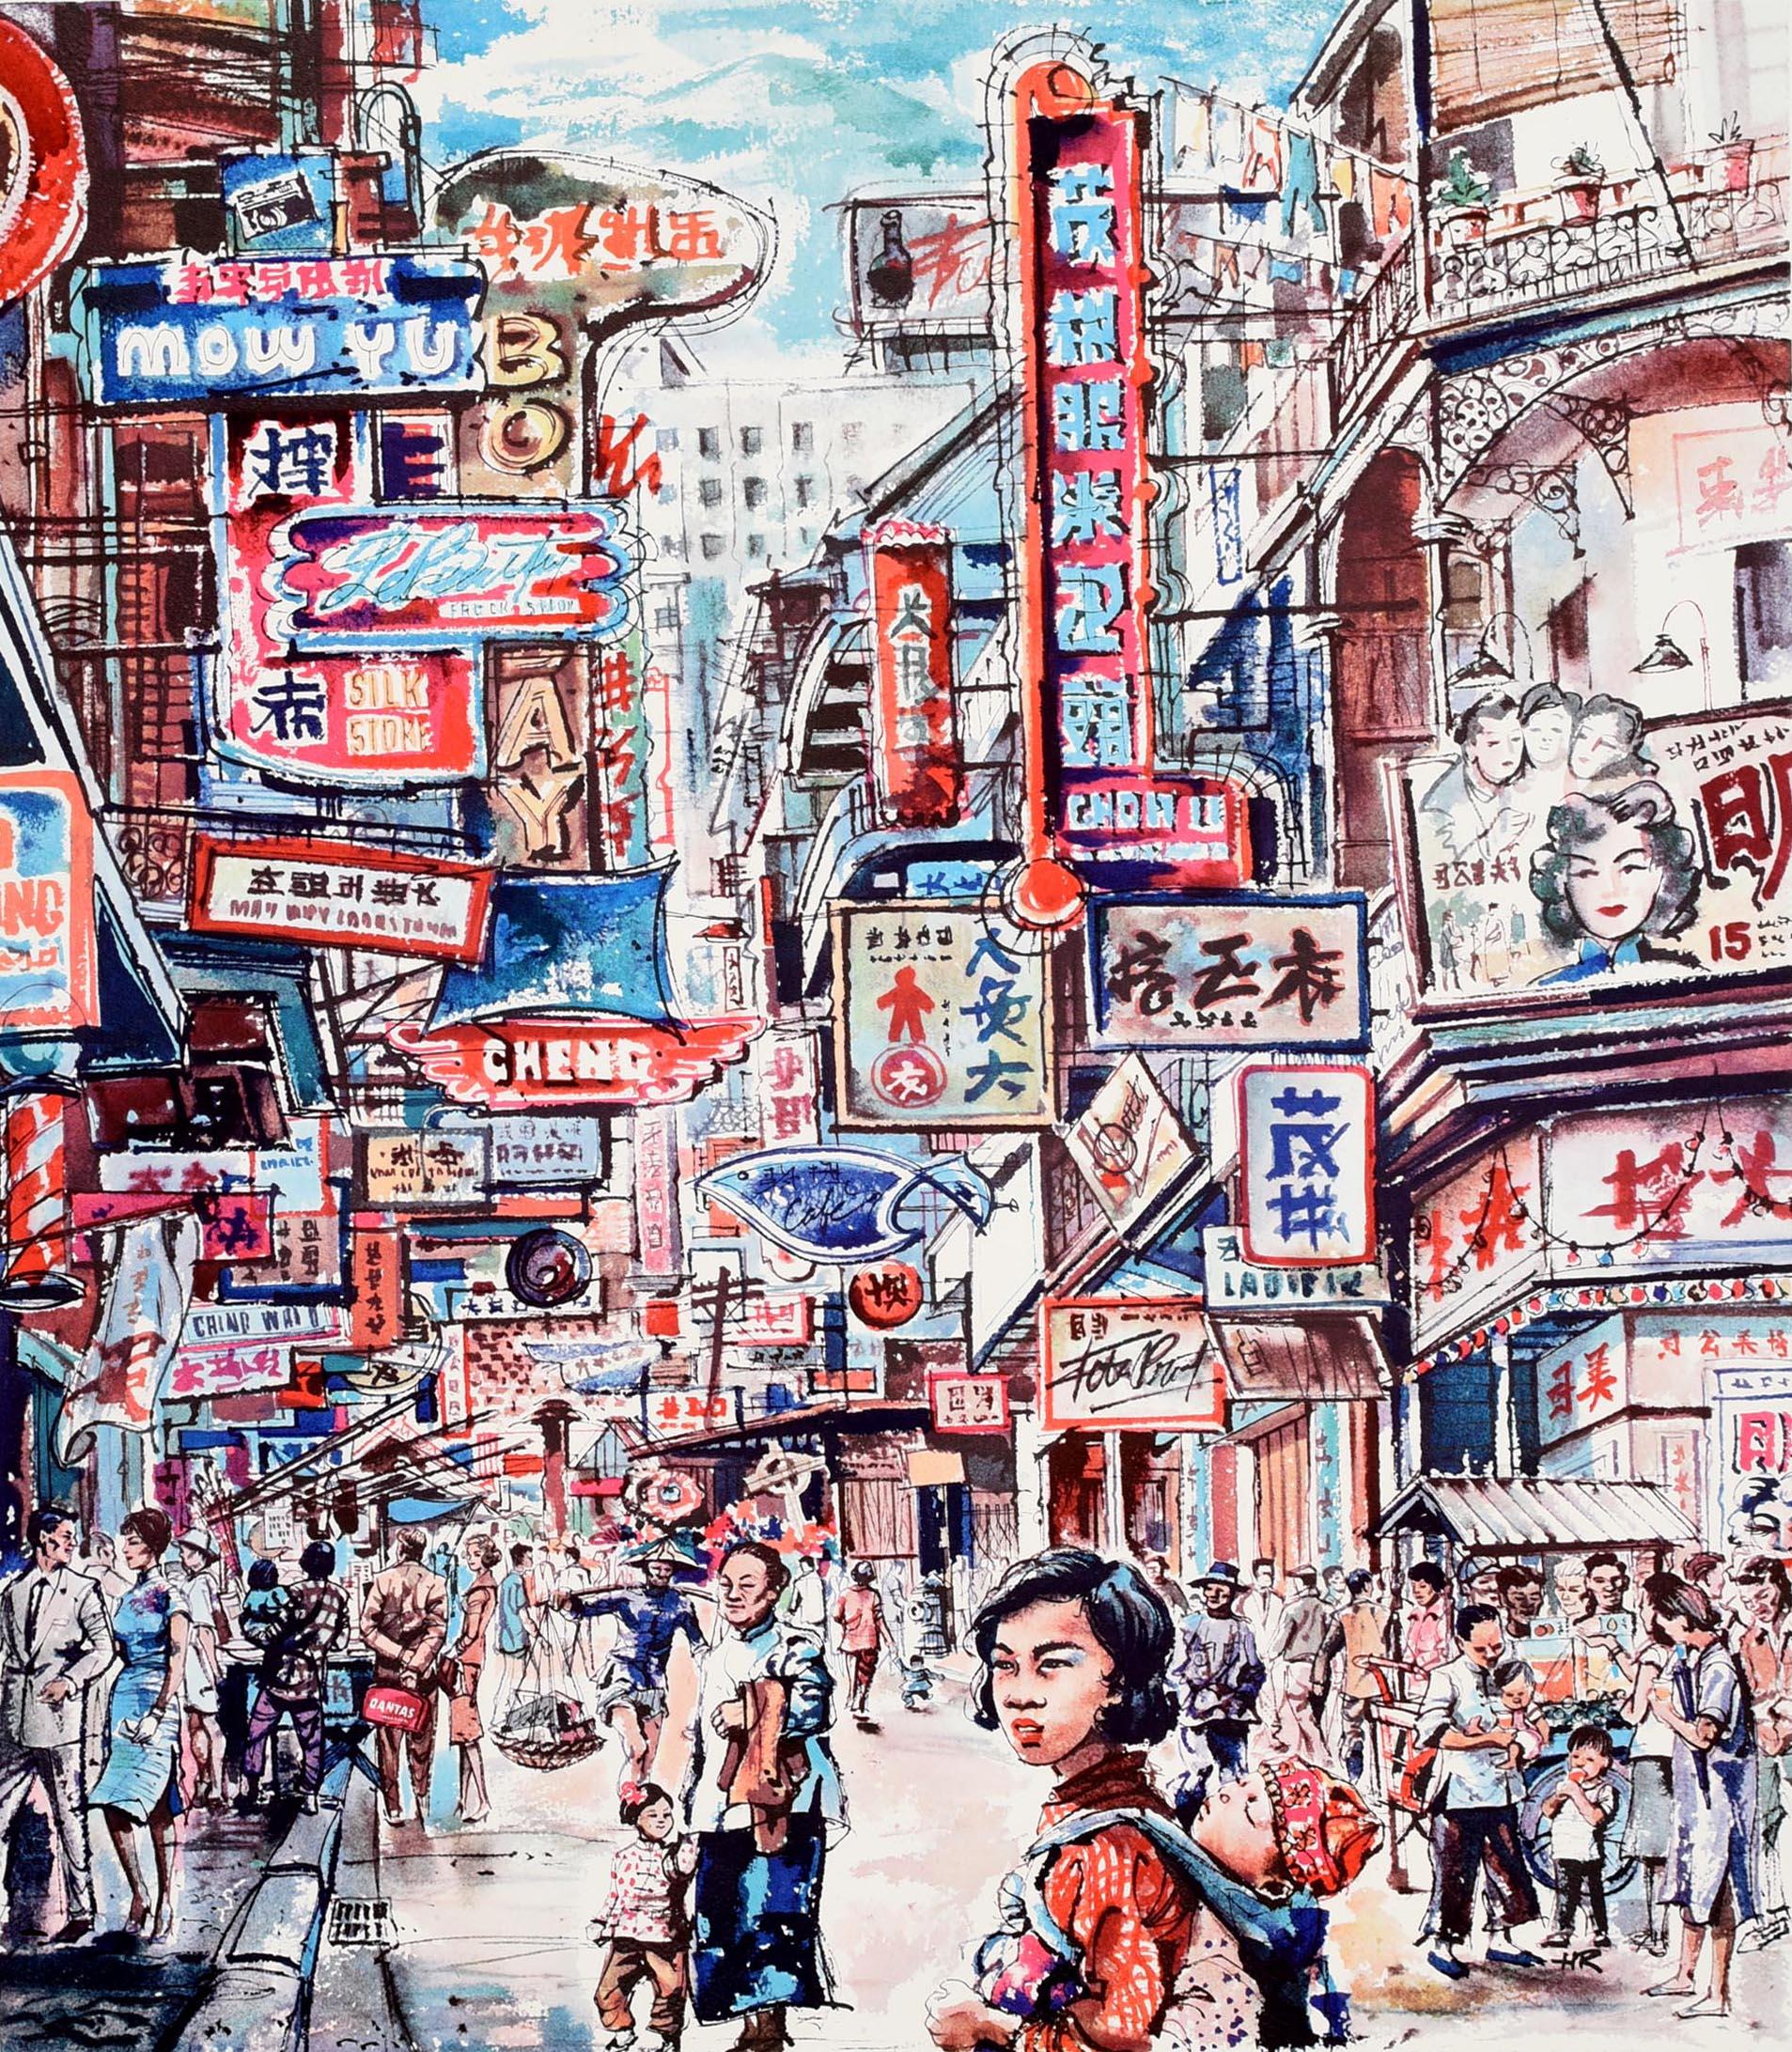 Original vintage travel poster for Hong Kong fly there by Qantas Australia's round the world airline. Fantastic artwork by Harry Rogers (1929-2012) depicting a busy street scene full of people walking around the shops below signs on the buildings,